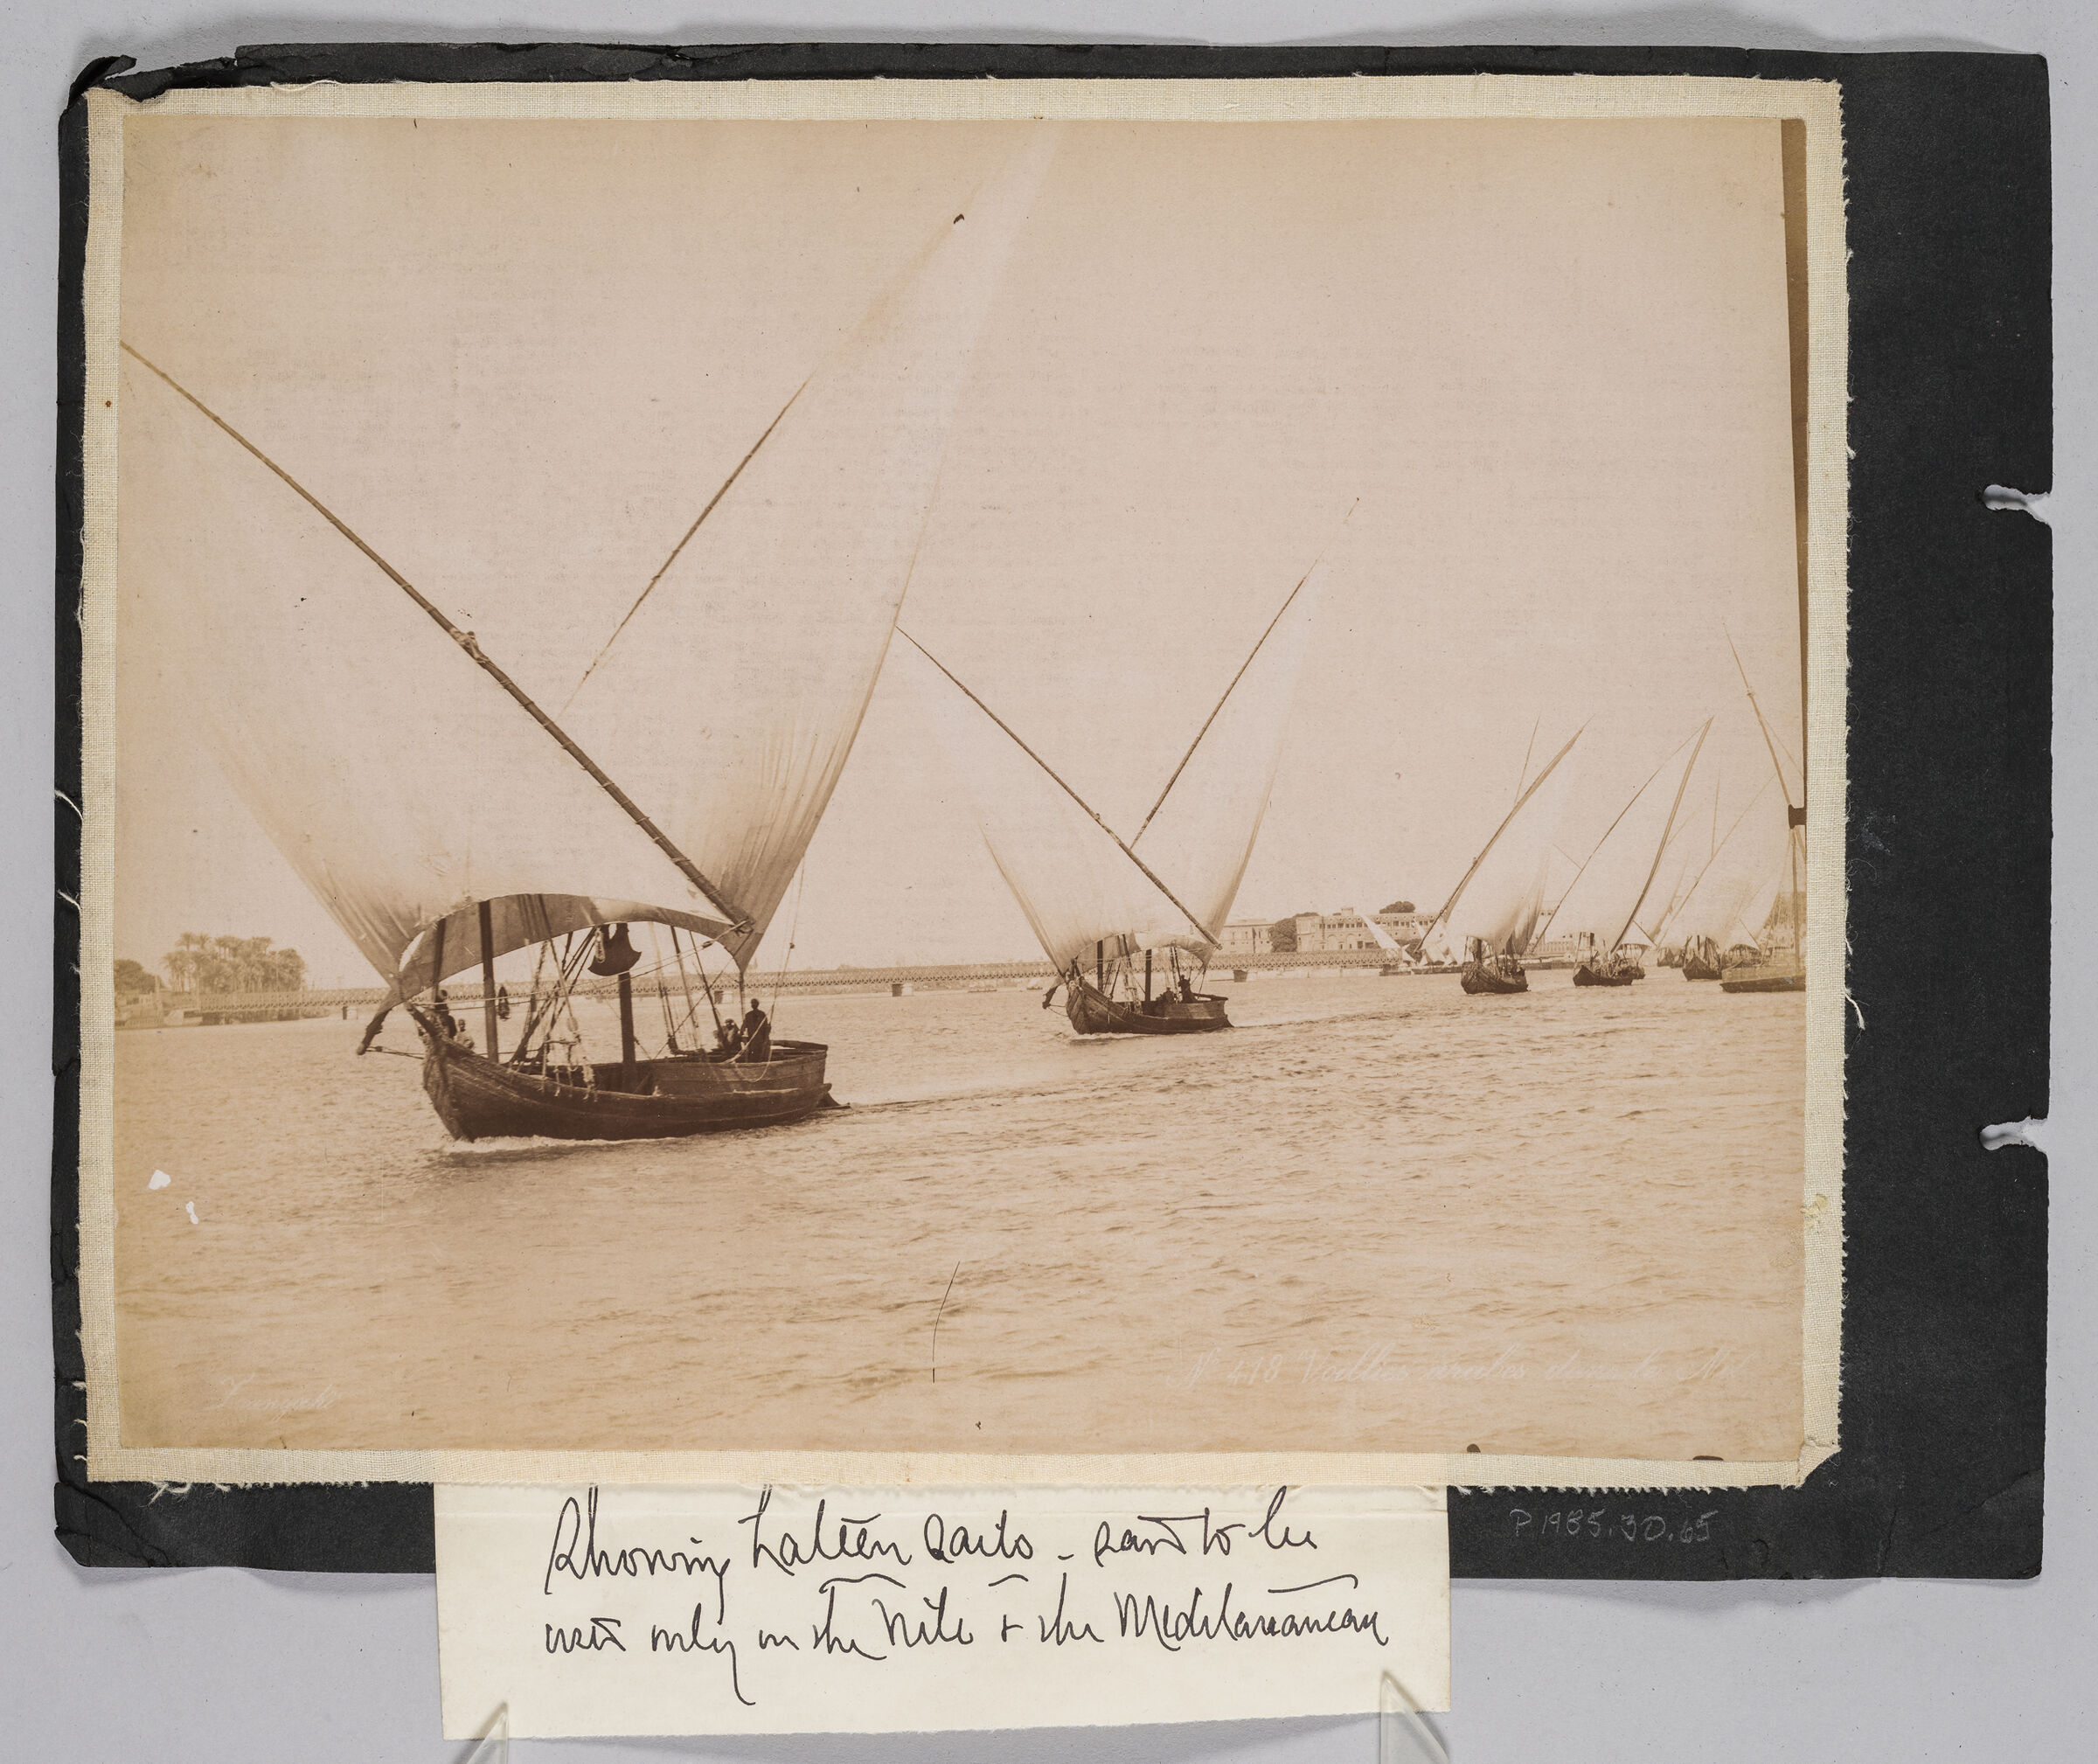 Untitled (Group Of Sailboats On The Nile)